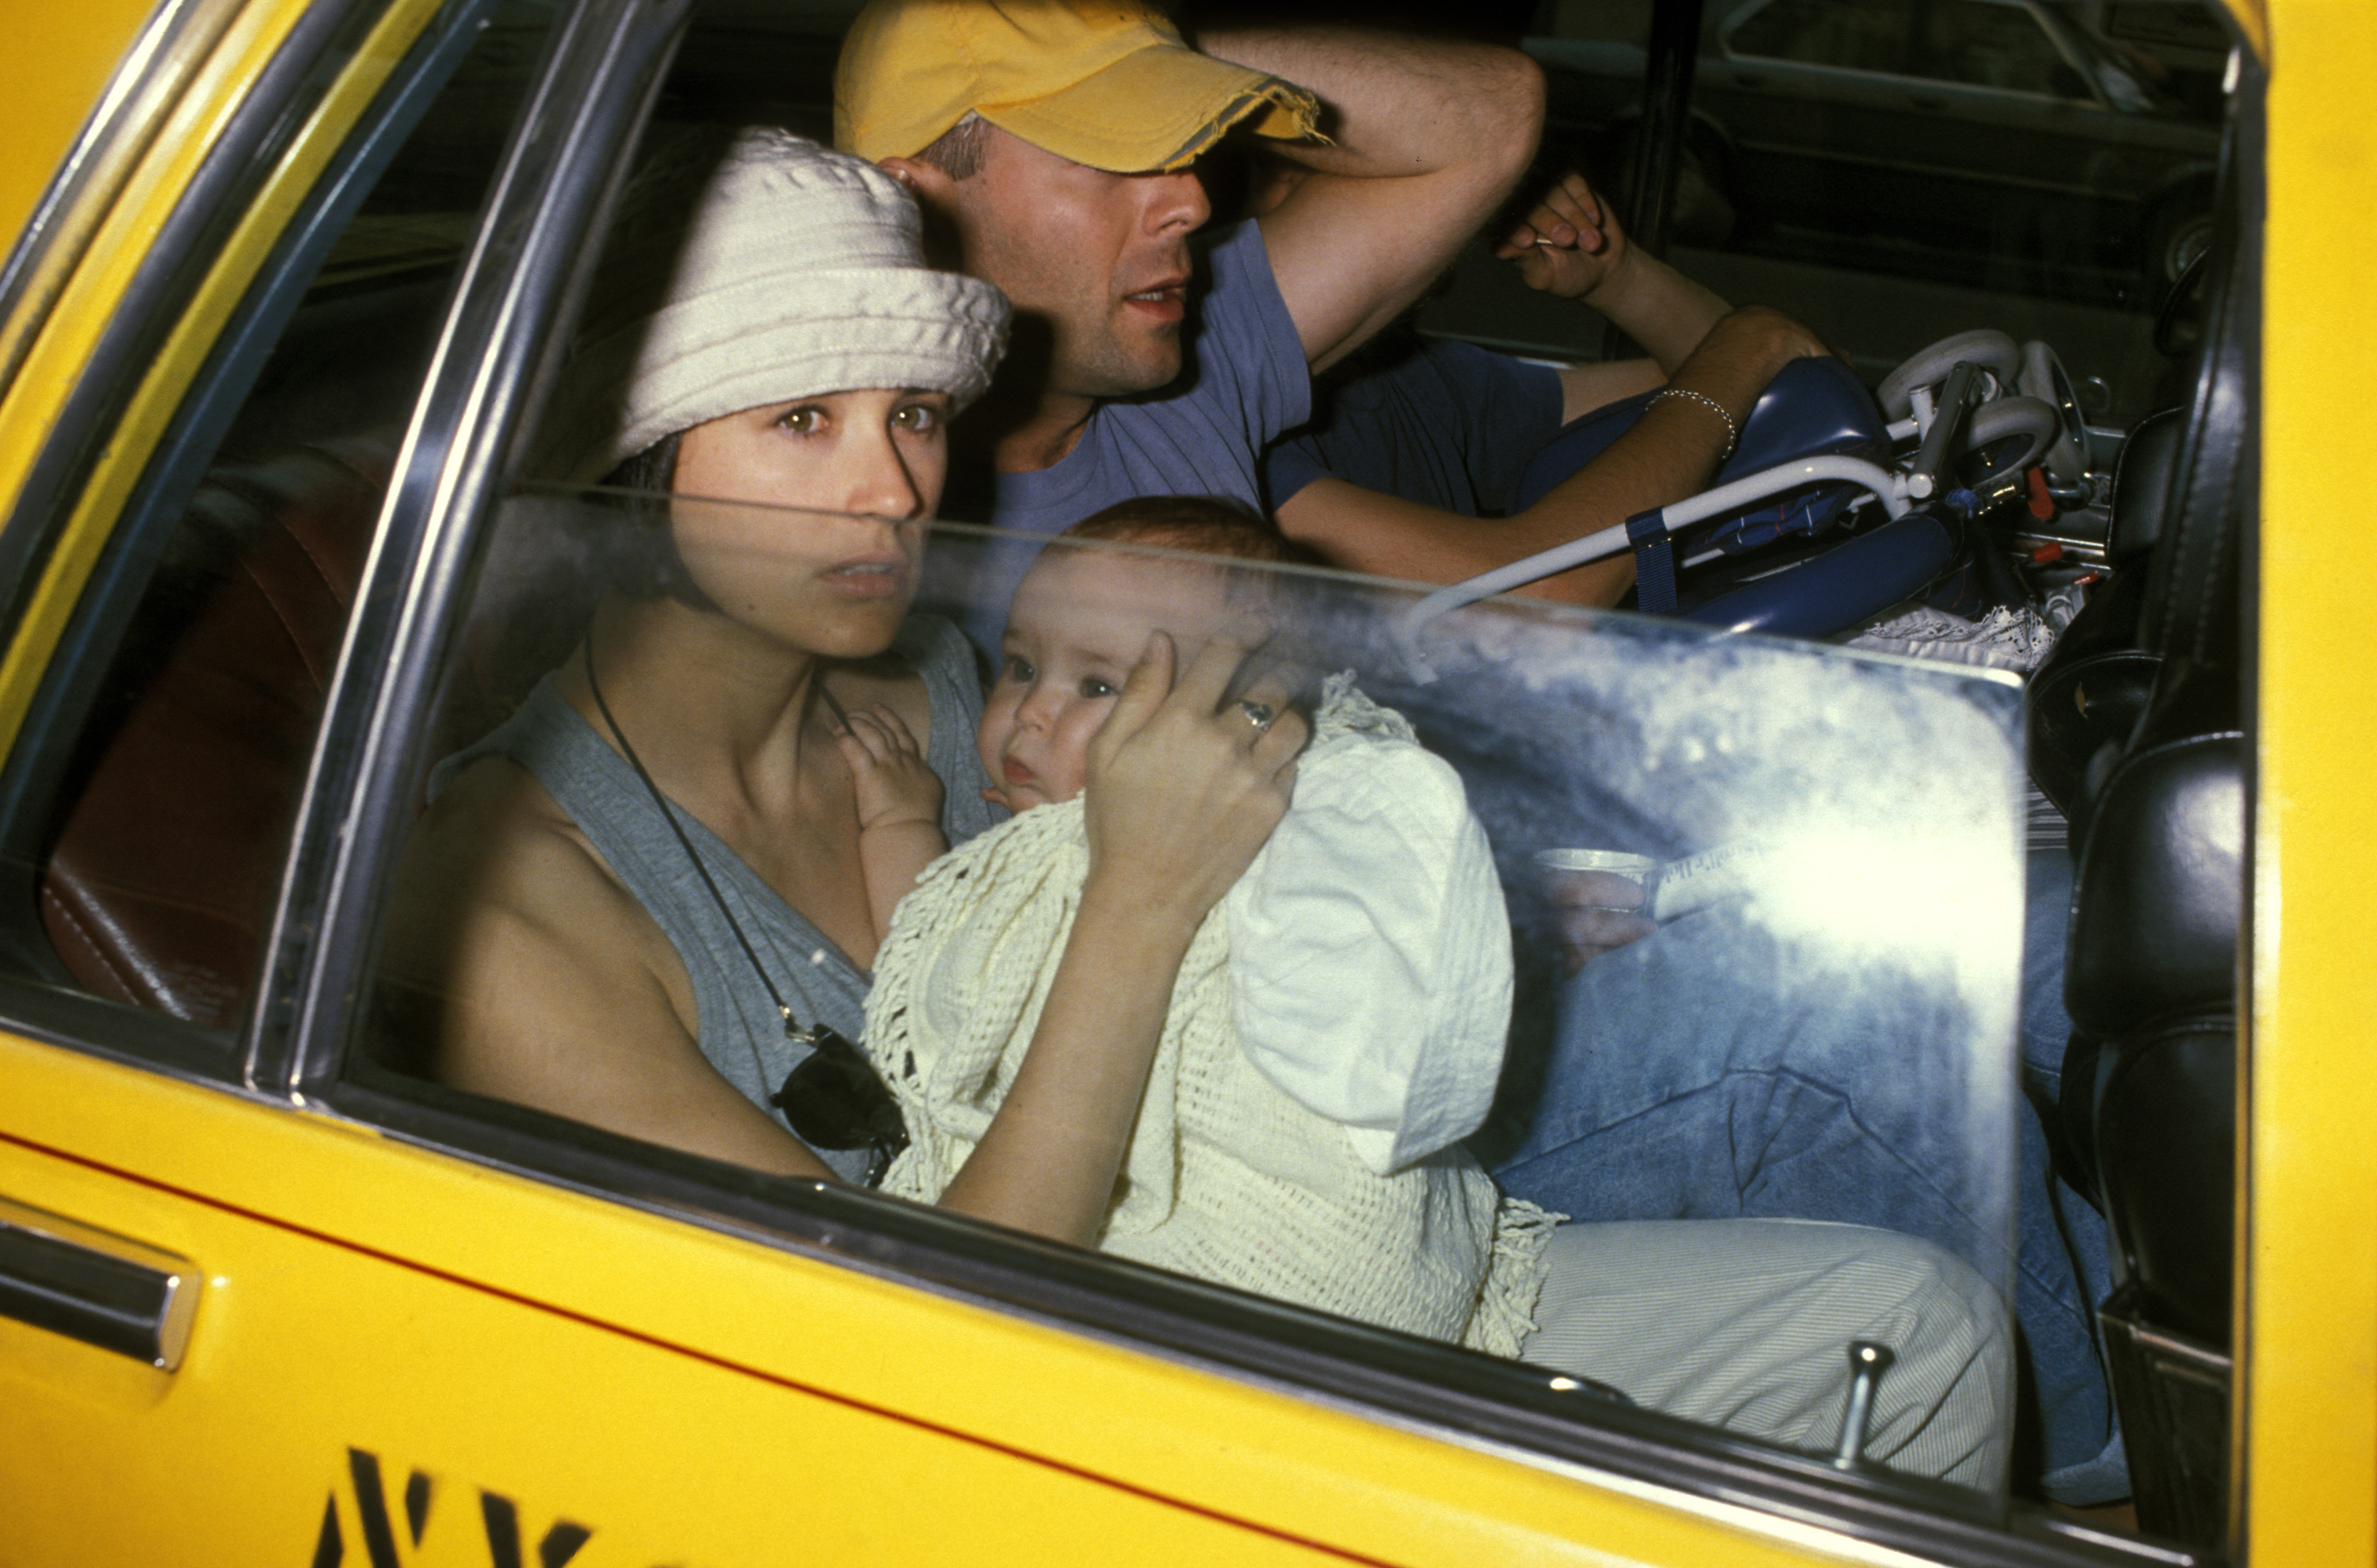 Bruce Willis, Demi Moore, and Daughter Rumer Willis in New York City - May 20, 1989. | Source: Getty Images